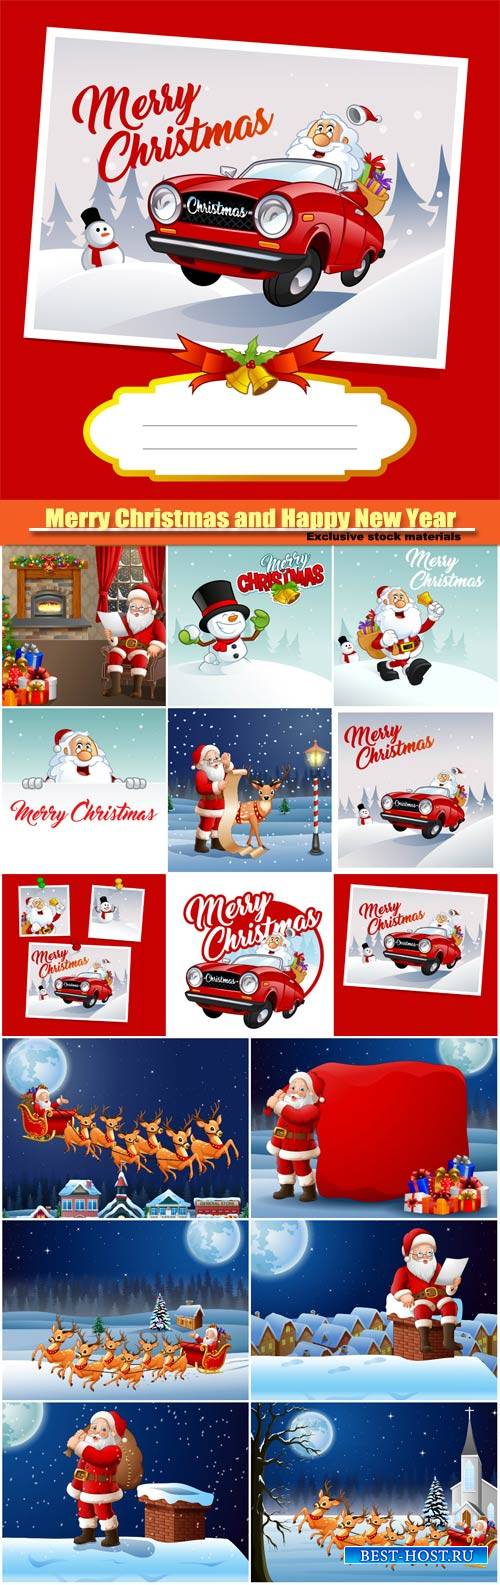 Merry Christmas and Happy New Year vector, Santa Clause and snowman